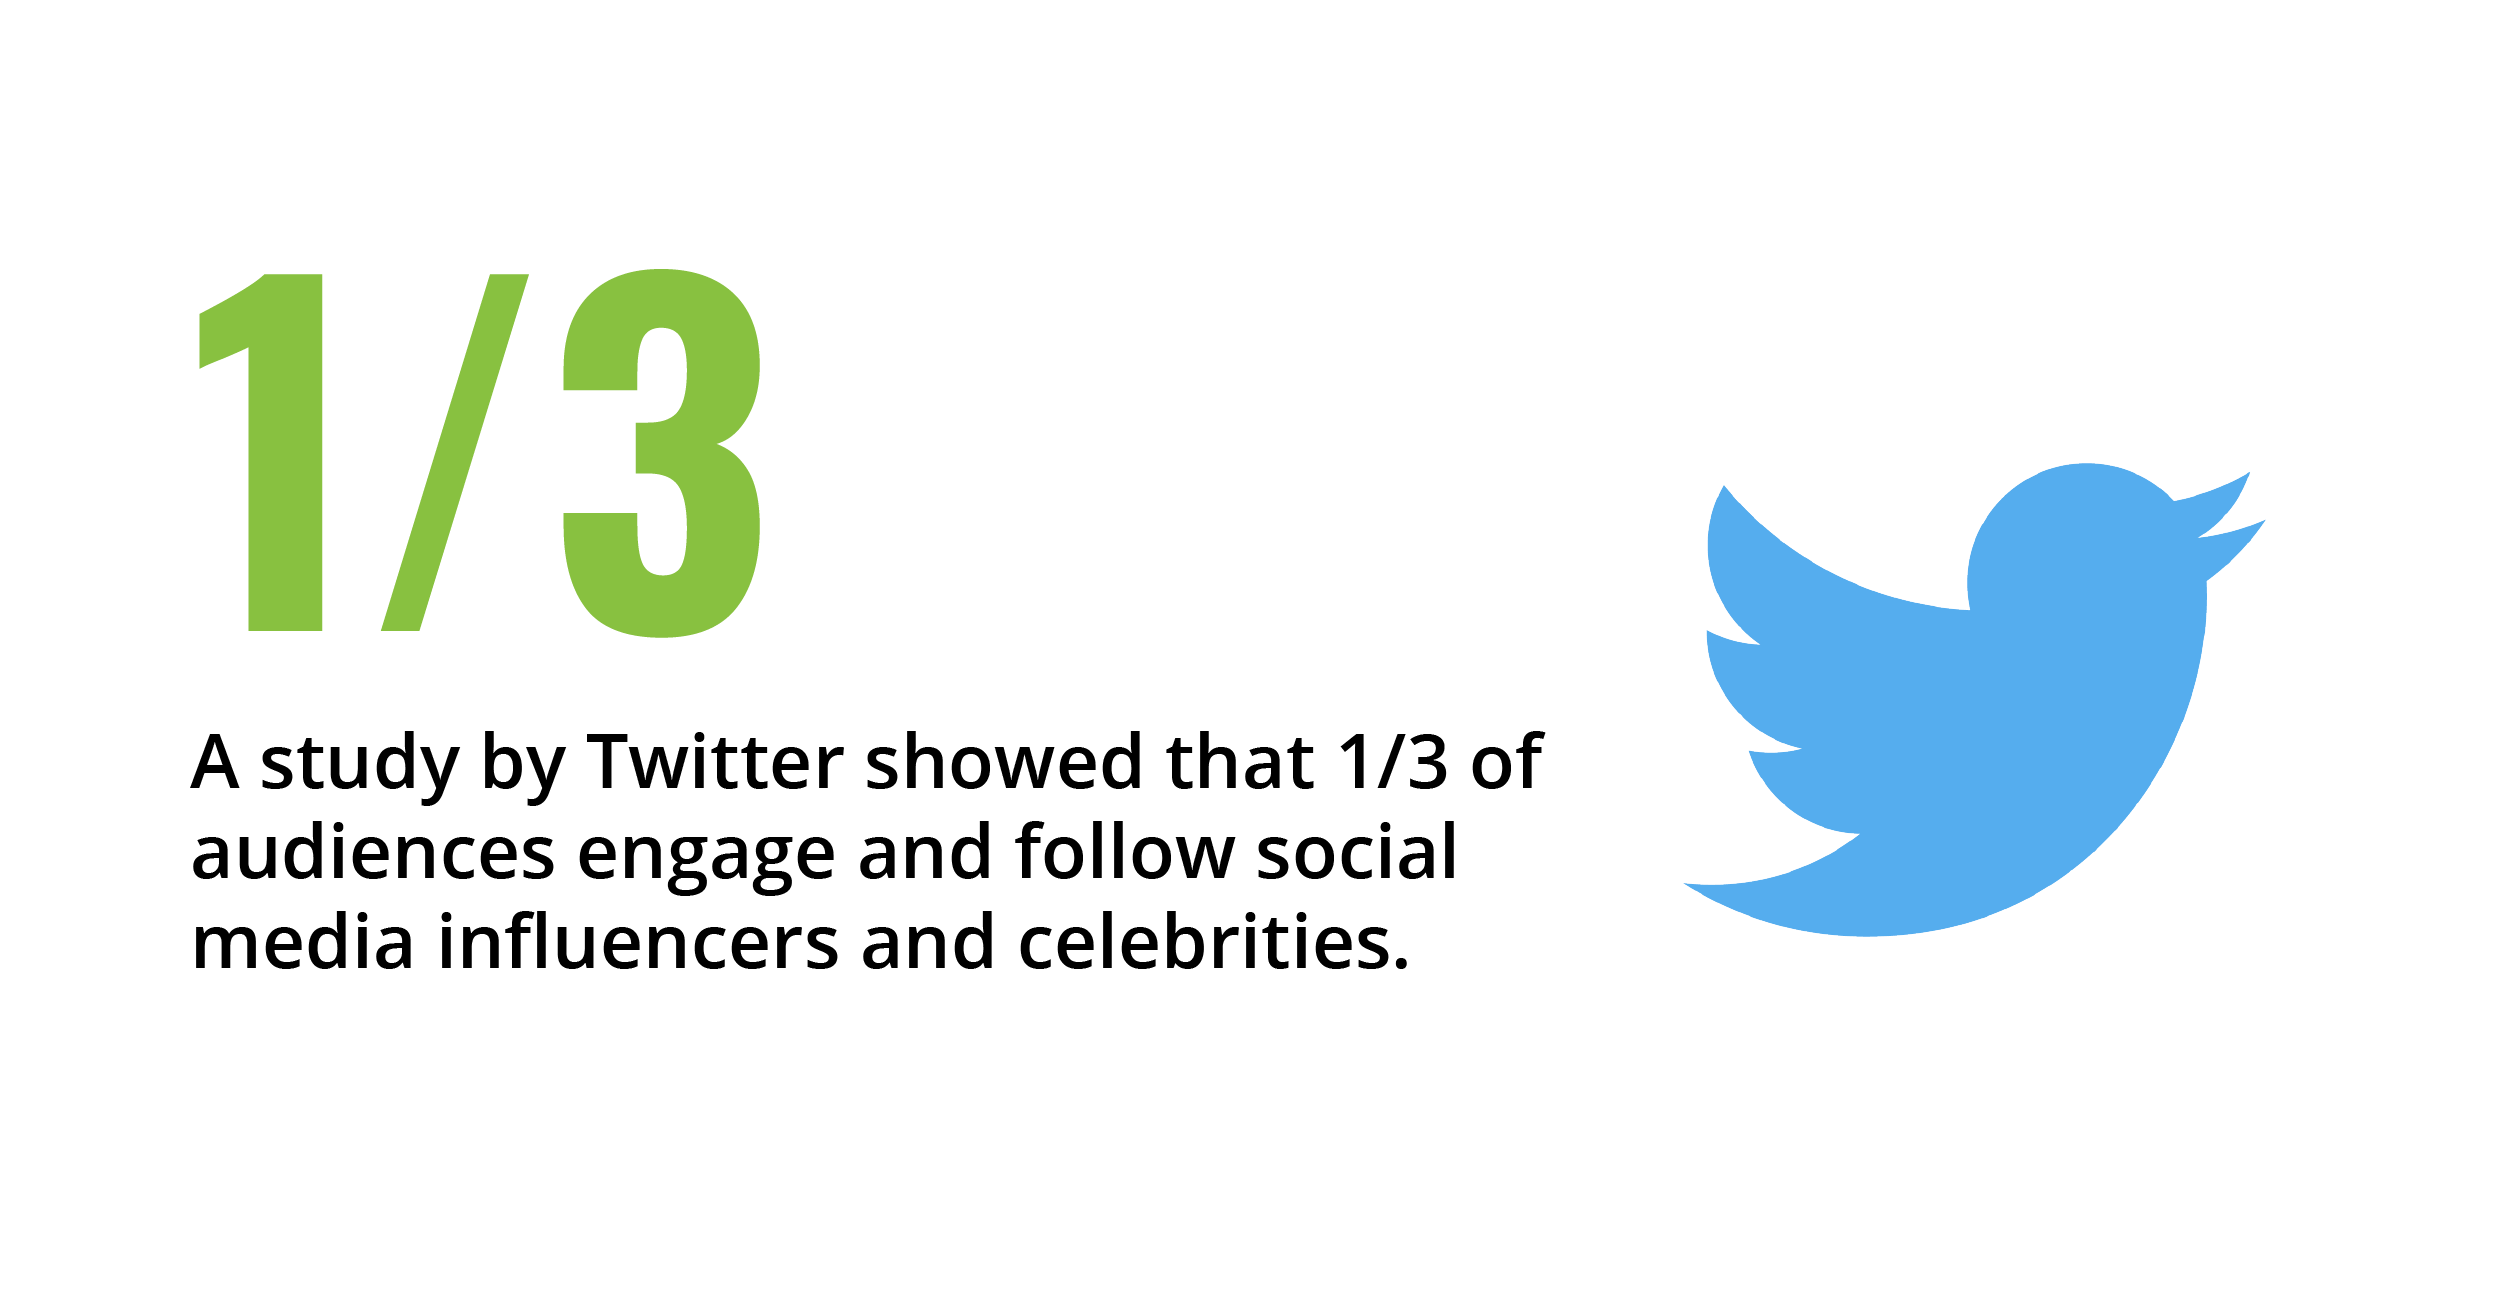 A study by Twitter showed that 1/3 of audiences engage and follow social media influencers and celebrities.